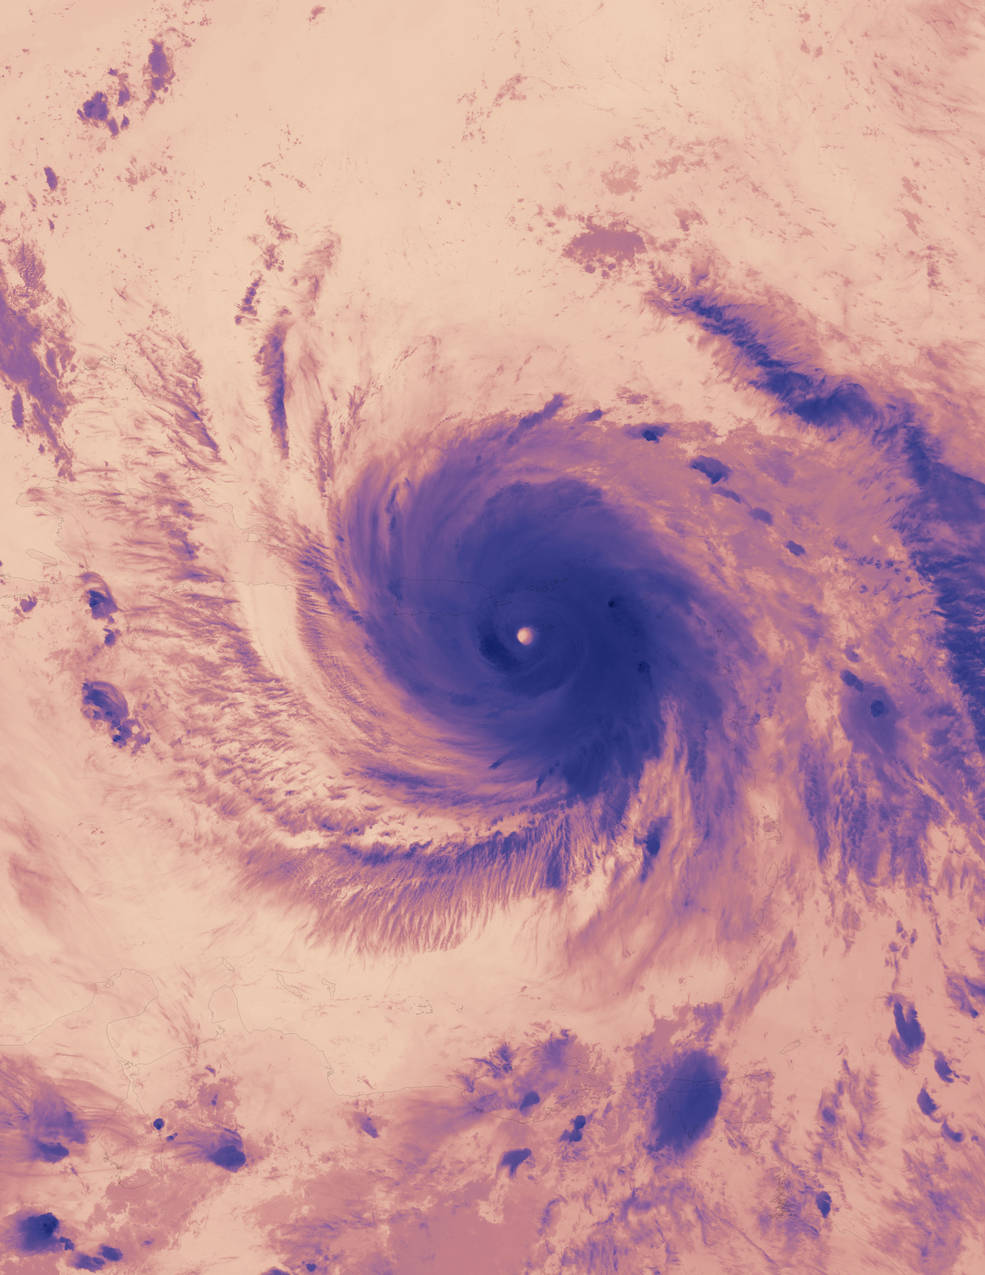 Satellite image showing the cloud tops of Hurricane Maria as well as a well-defined eye